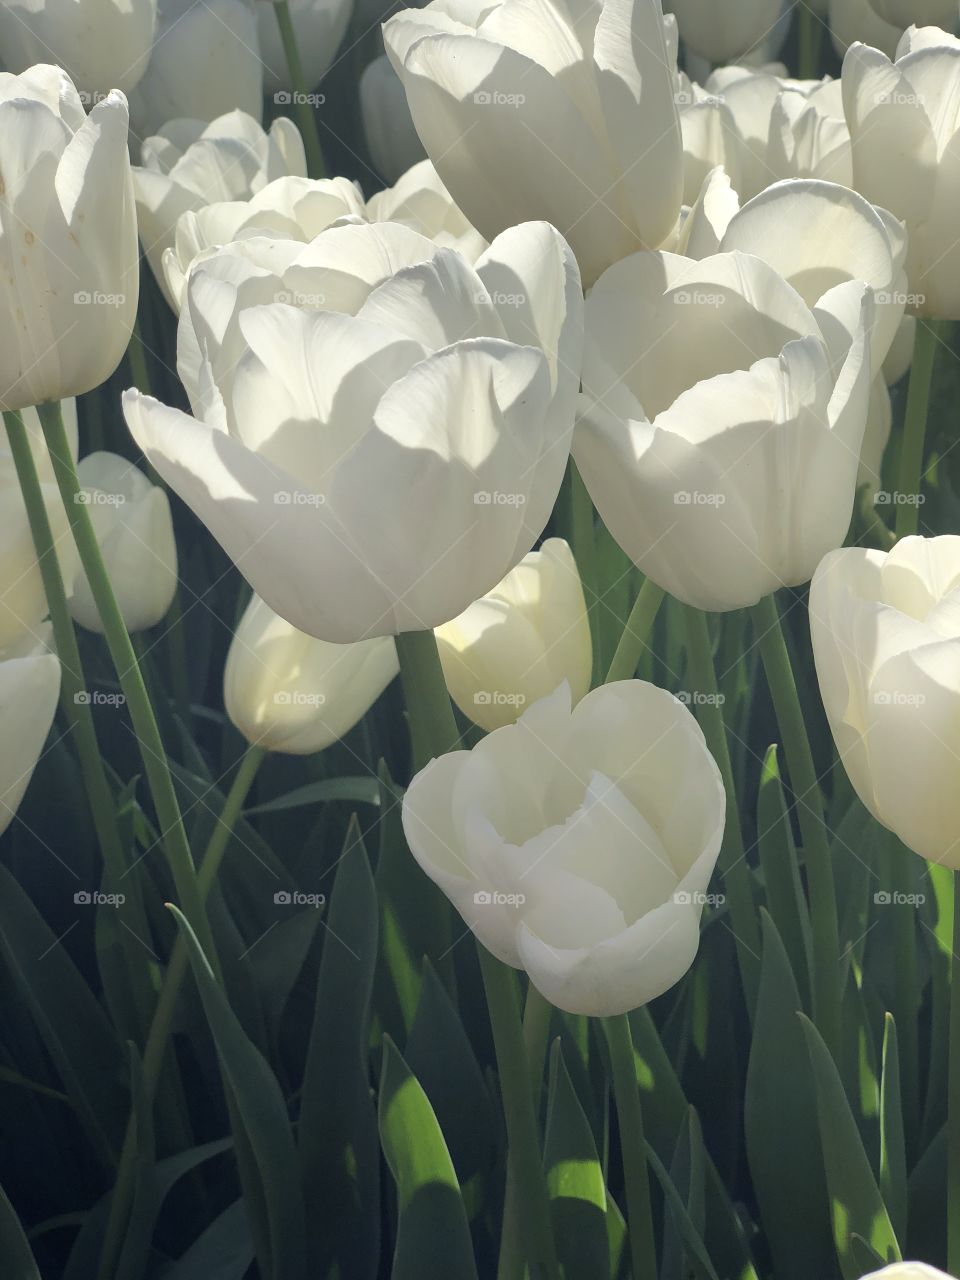 White Tulips in Istanbul